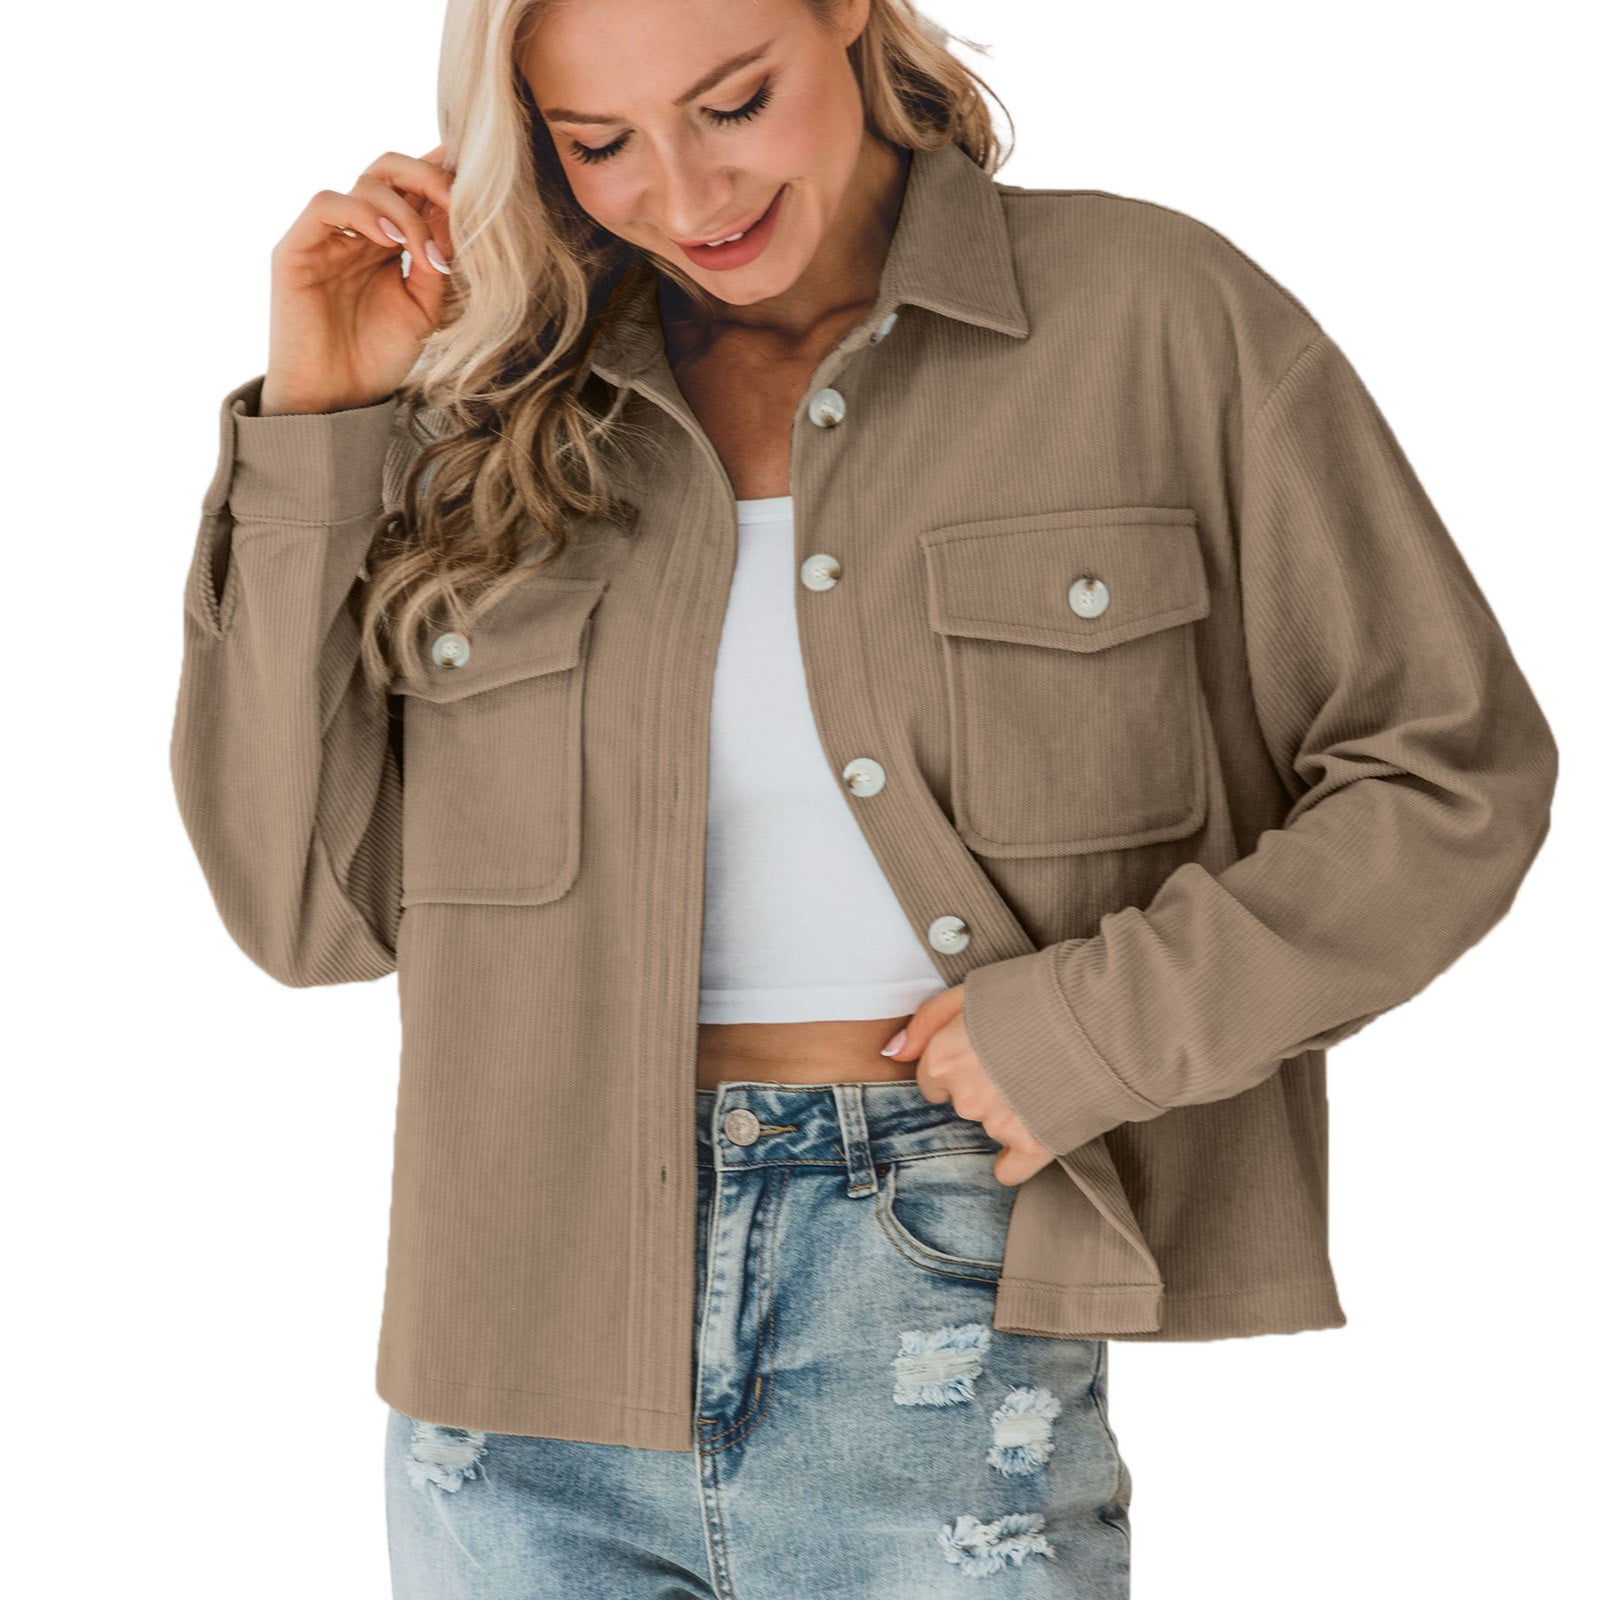 HSMQHJWE Womens Zip Up Jacket Business Jackets For Women Womens Casual  Cropped Corduroy Jackets Button Down Long Sleeve Shirts Jacket With Pockets  Petite Jackets 